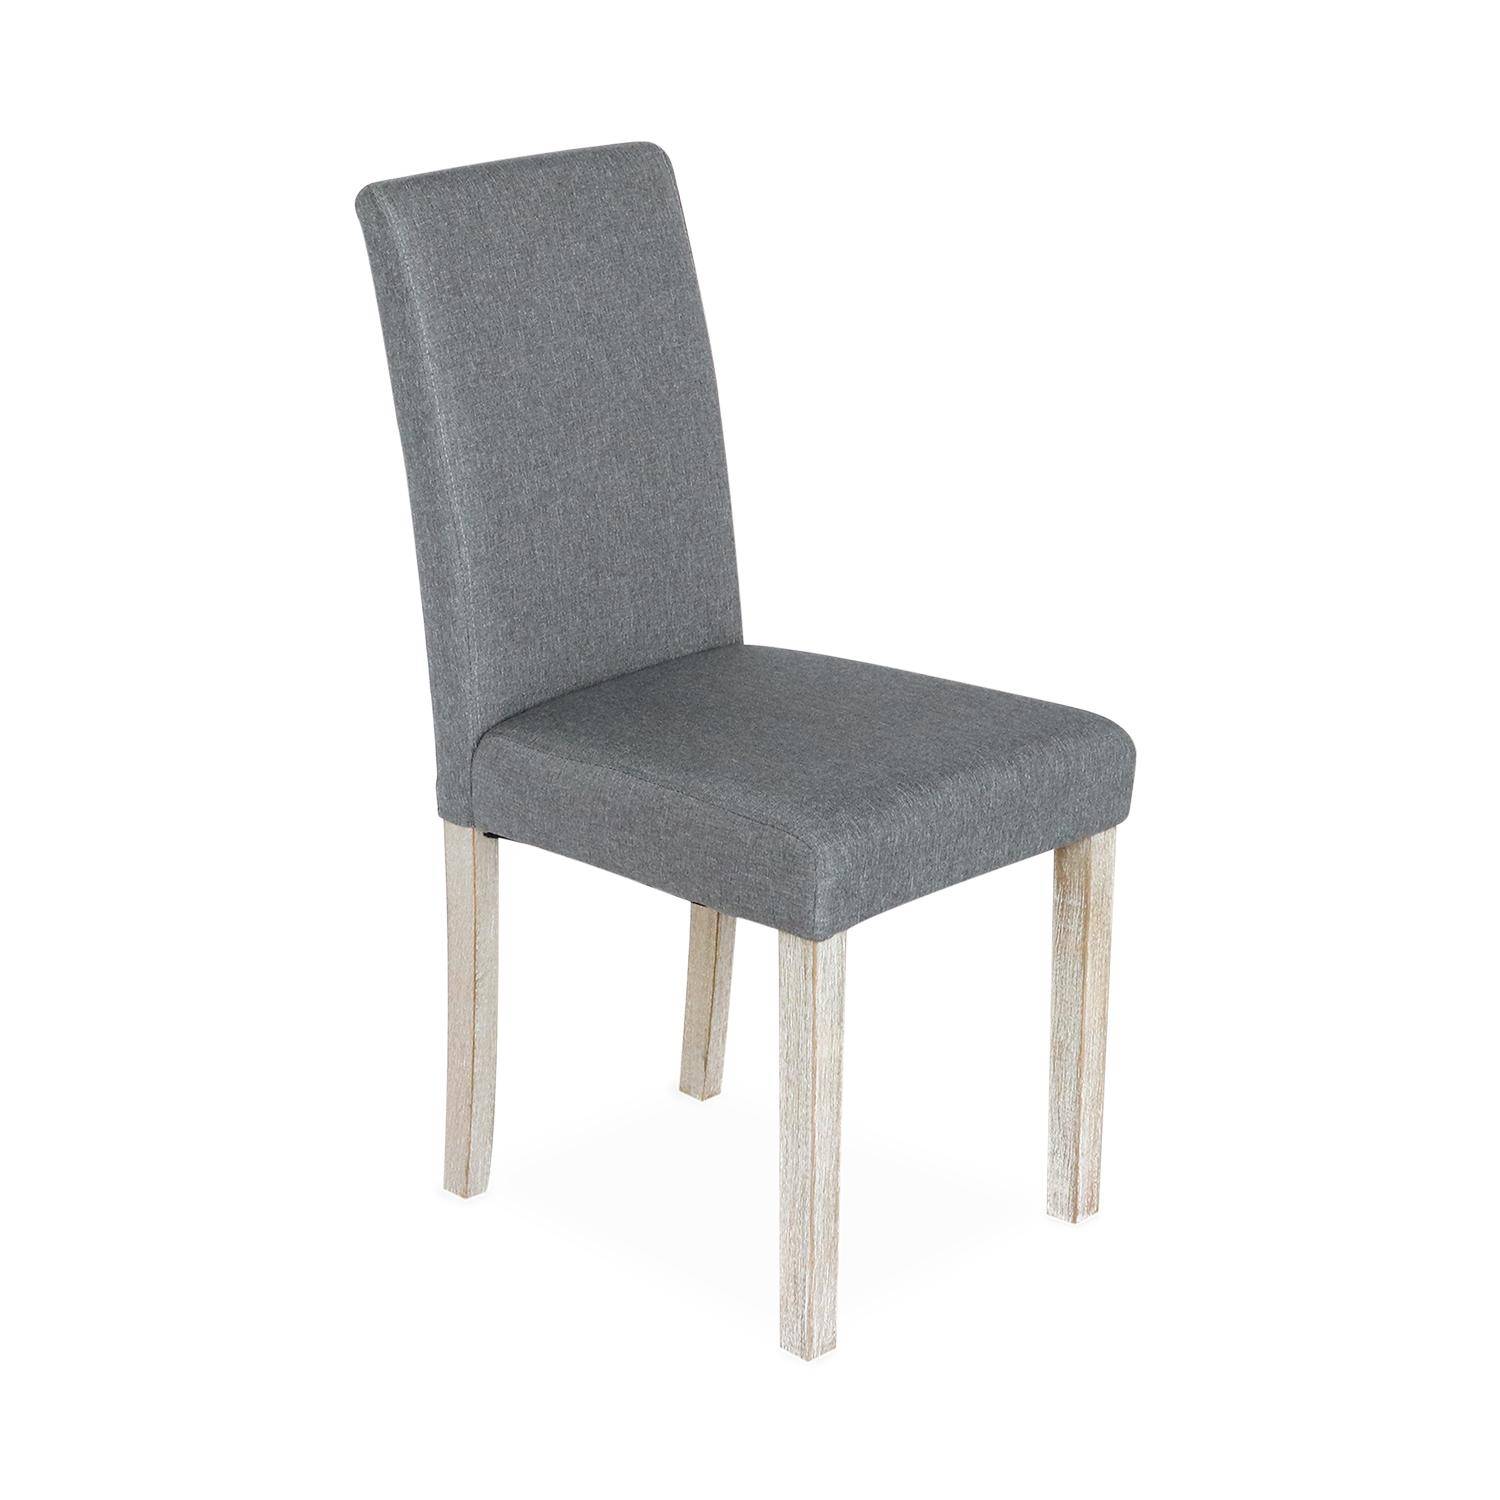 Set of 4 fabric dining chairs with wooden legs - Rita - Light grey Photo4